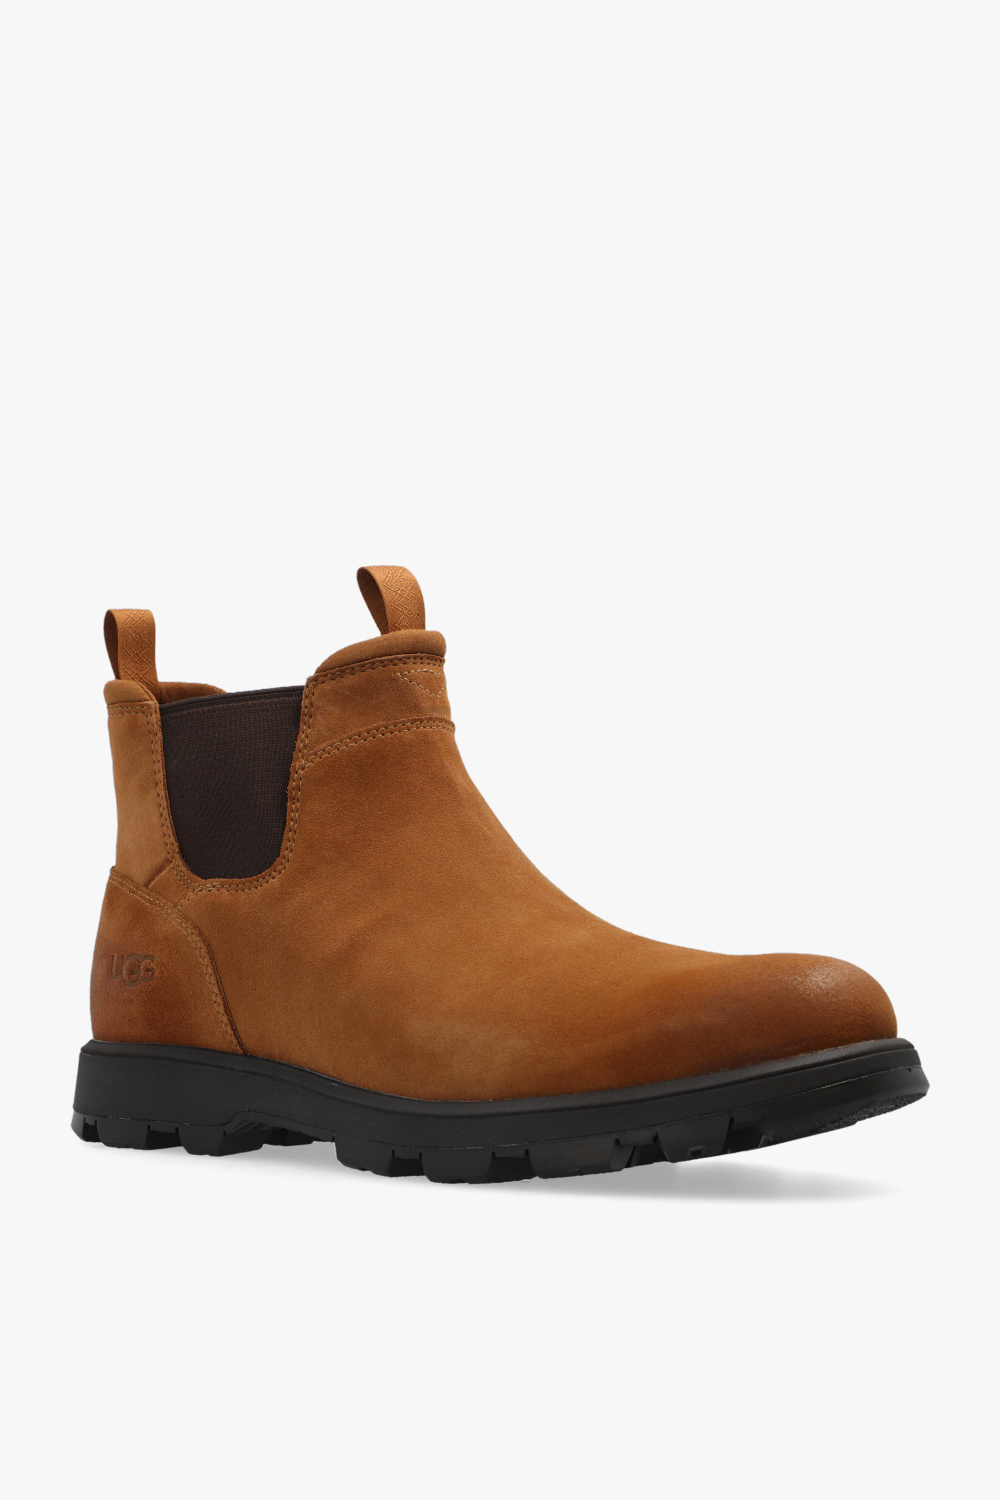 UGG ‘Hillmont’ insulated Chelsea boots